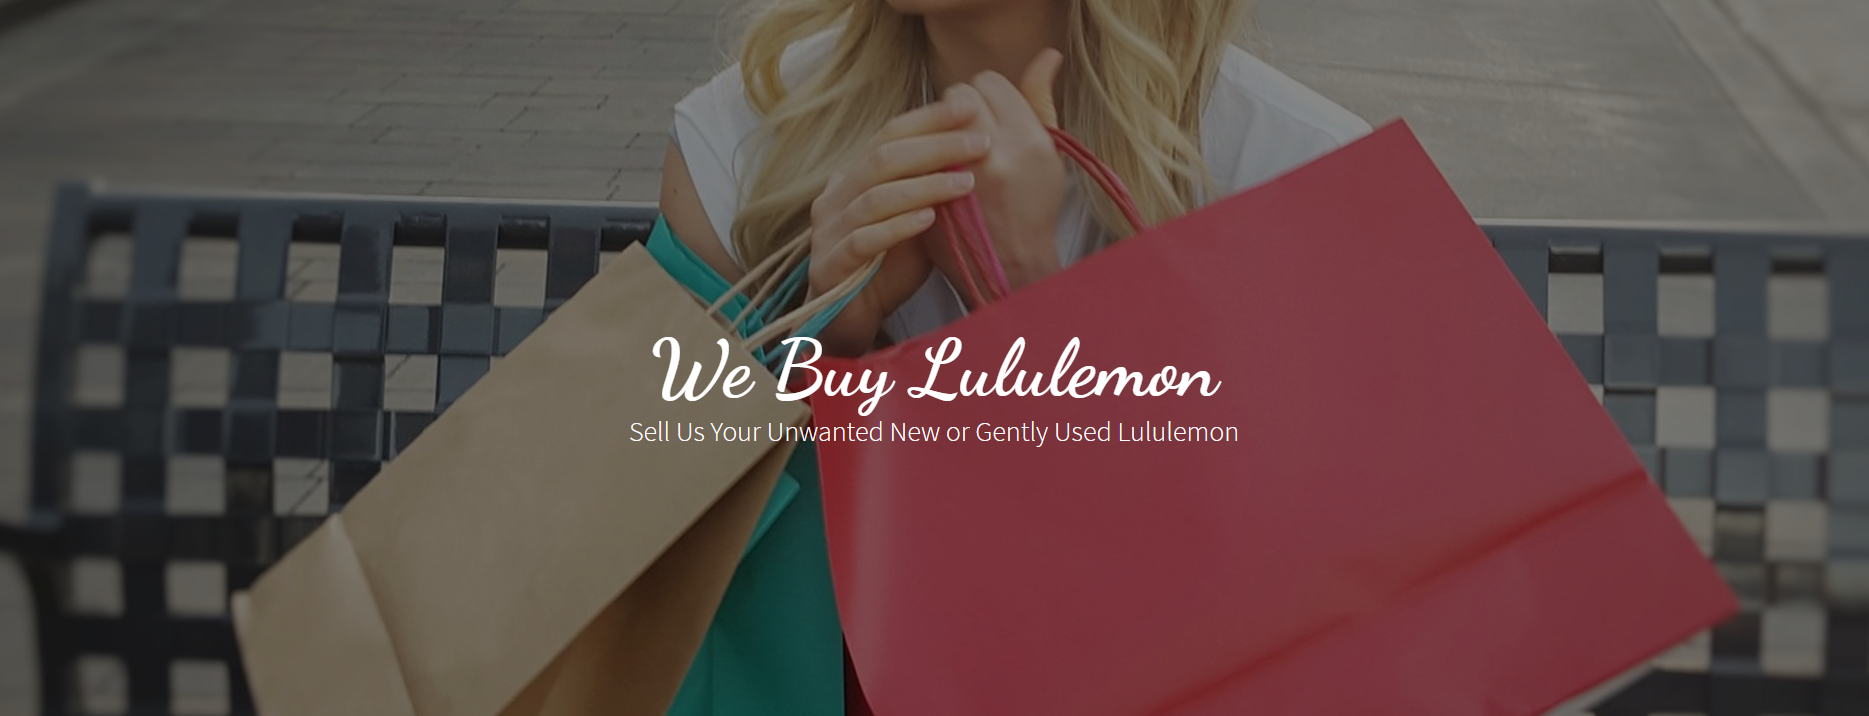 cheapest place to buy lululemon